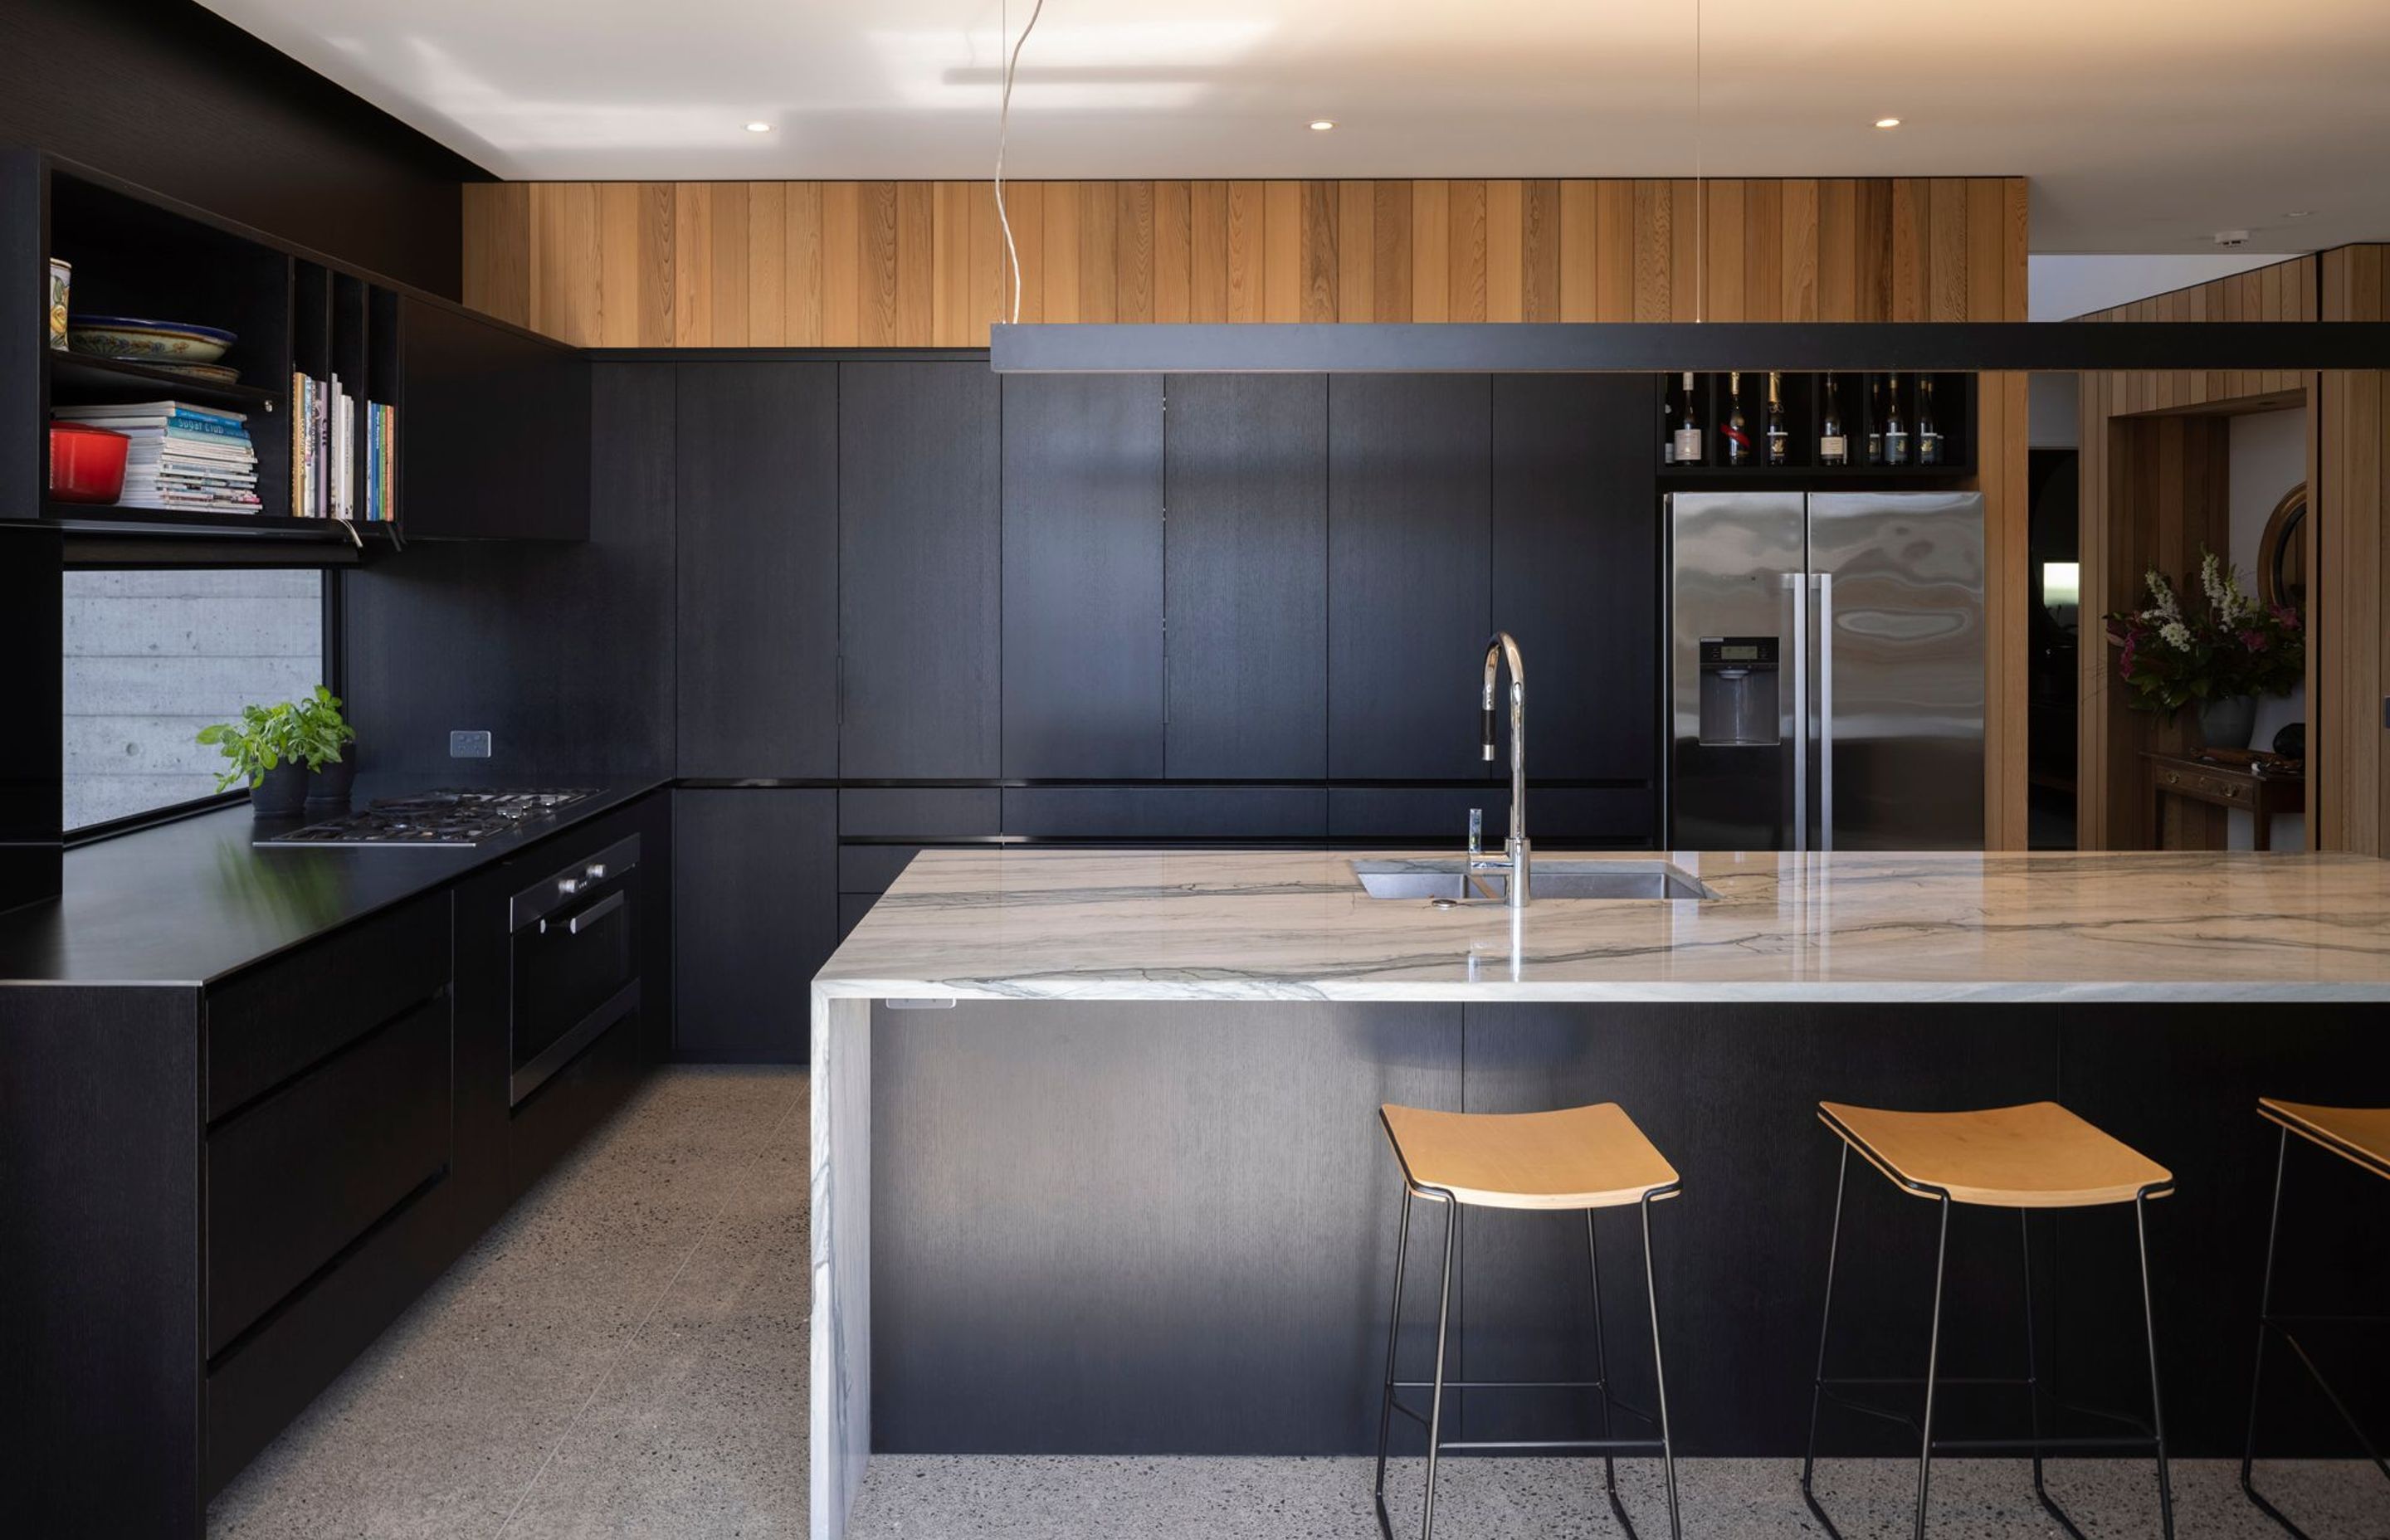 Studio Pacific Architecture also designed the kitchen. “We do like to do the kitchens as well, they’re really a focus in any house.”